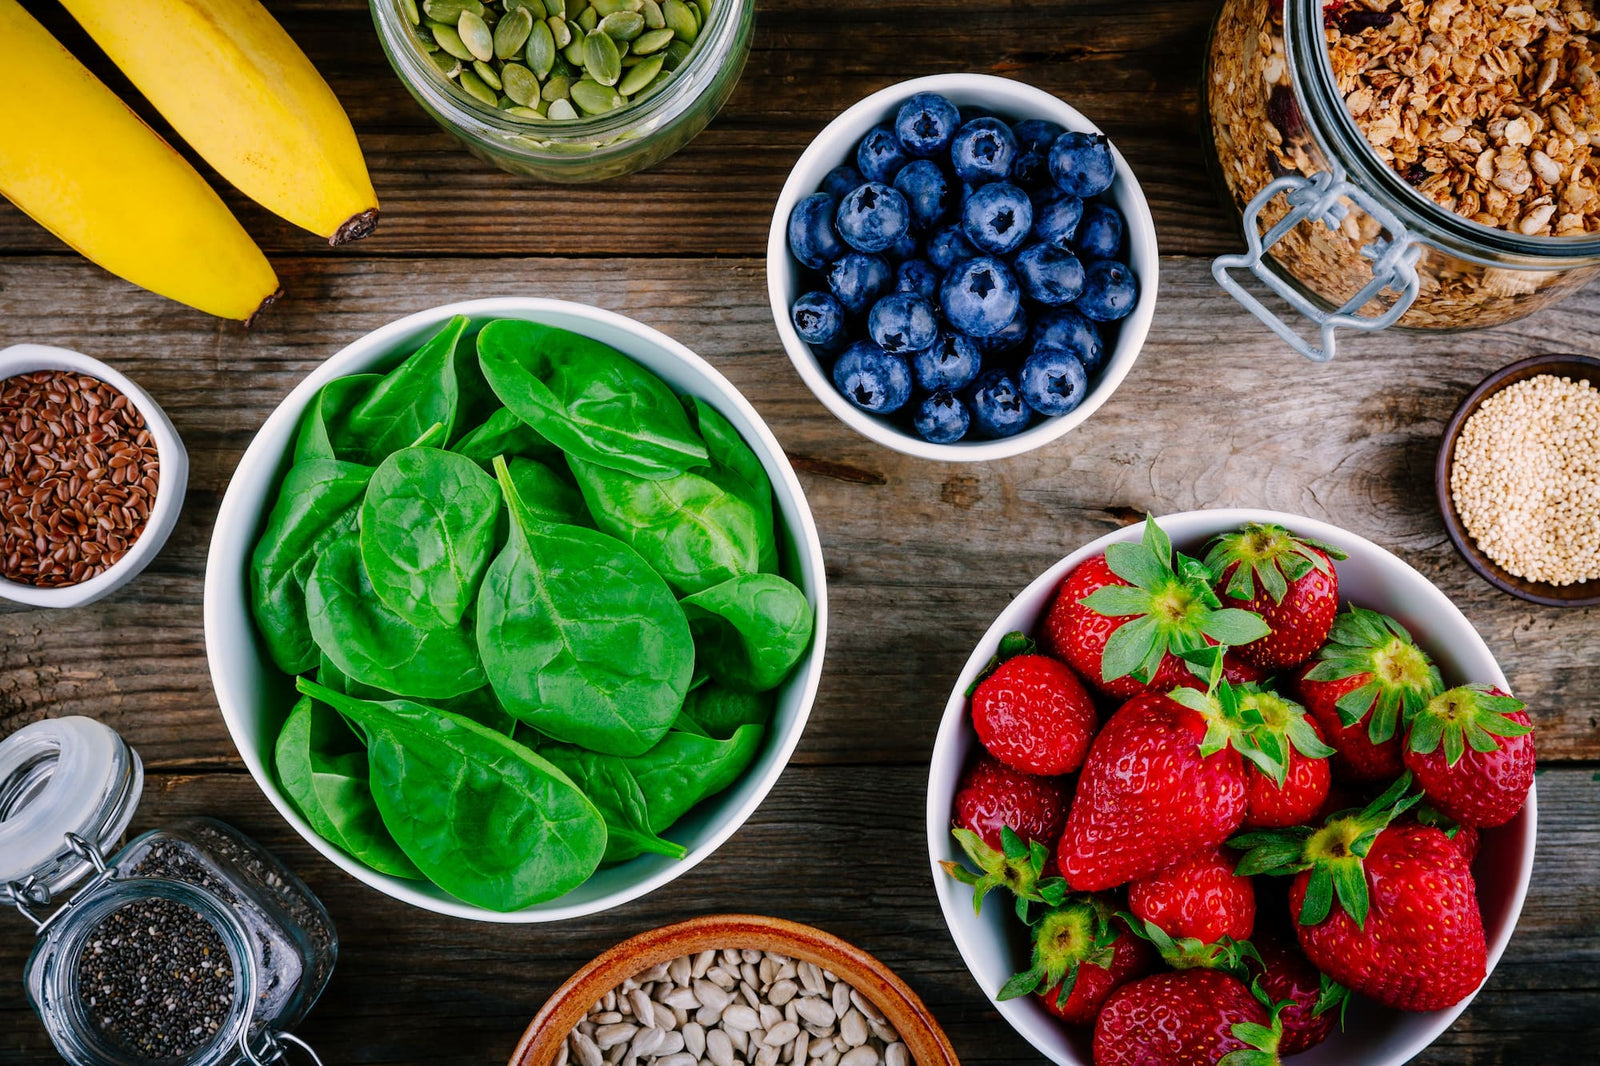 Boost your fertility naturally with nutrient-packed superfoods like berries, nuts, seeds, and leafy greens.